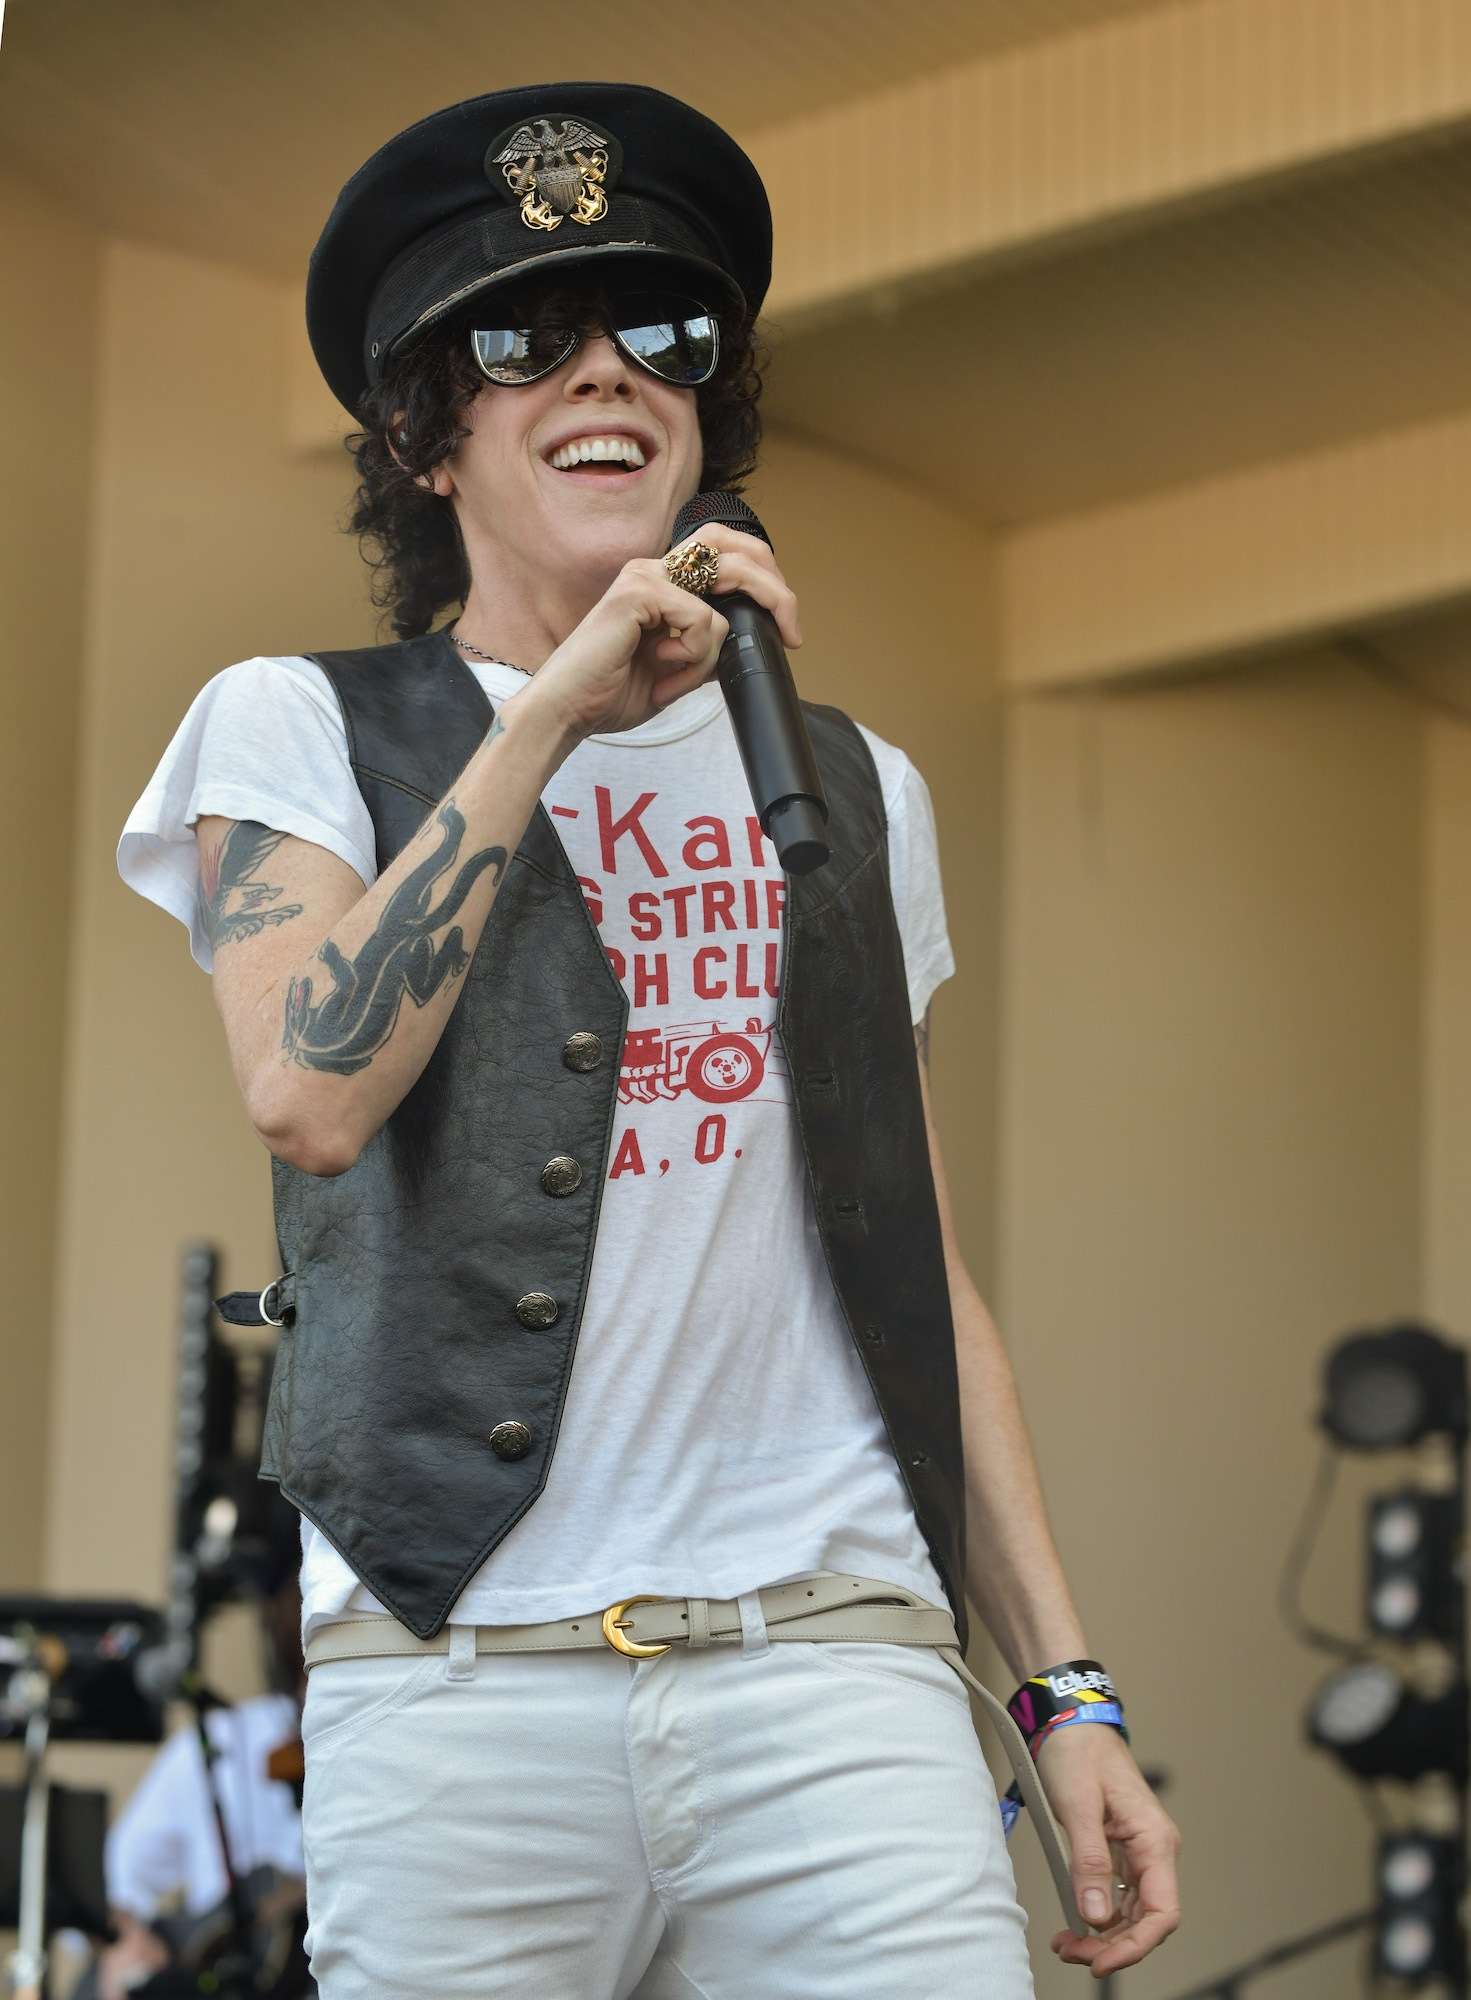 LP Live at Lollapalooza [GALLERY] 11